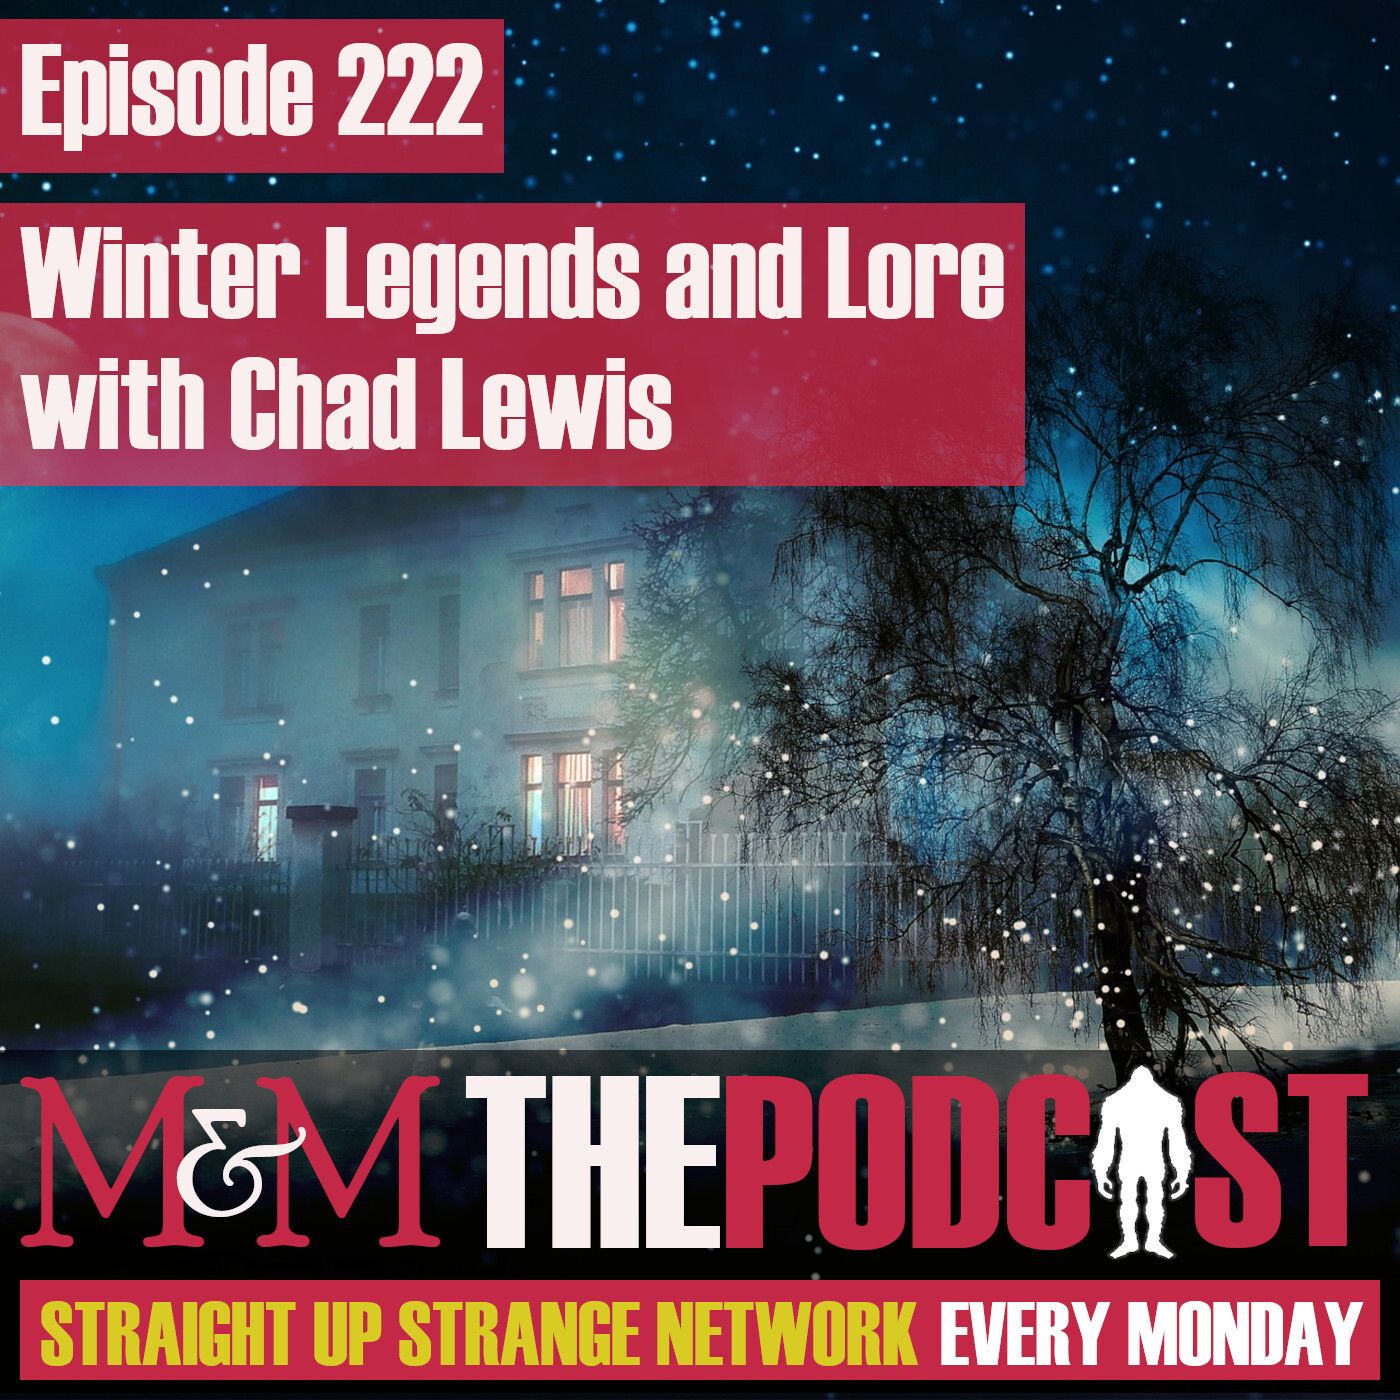 Mysteries and Monsters: Episode 222 Winter Legends and Lore with Chad Lewis